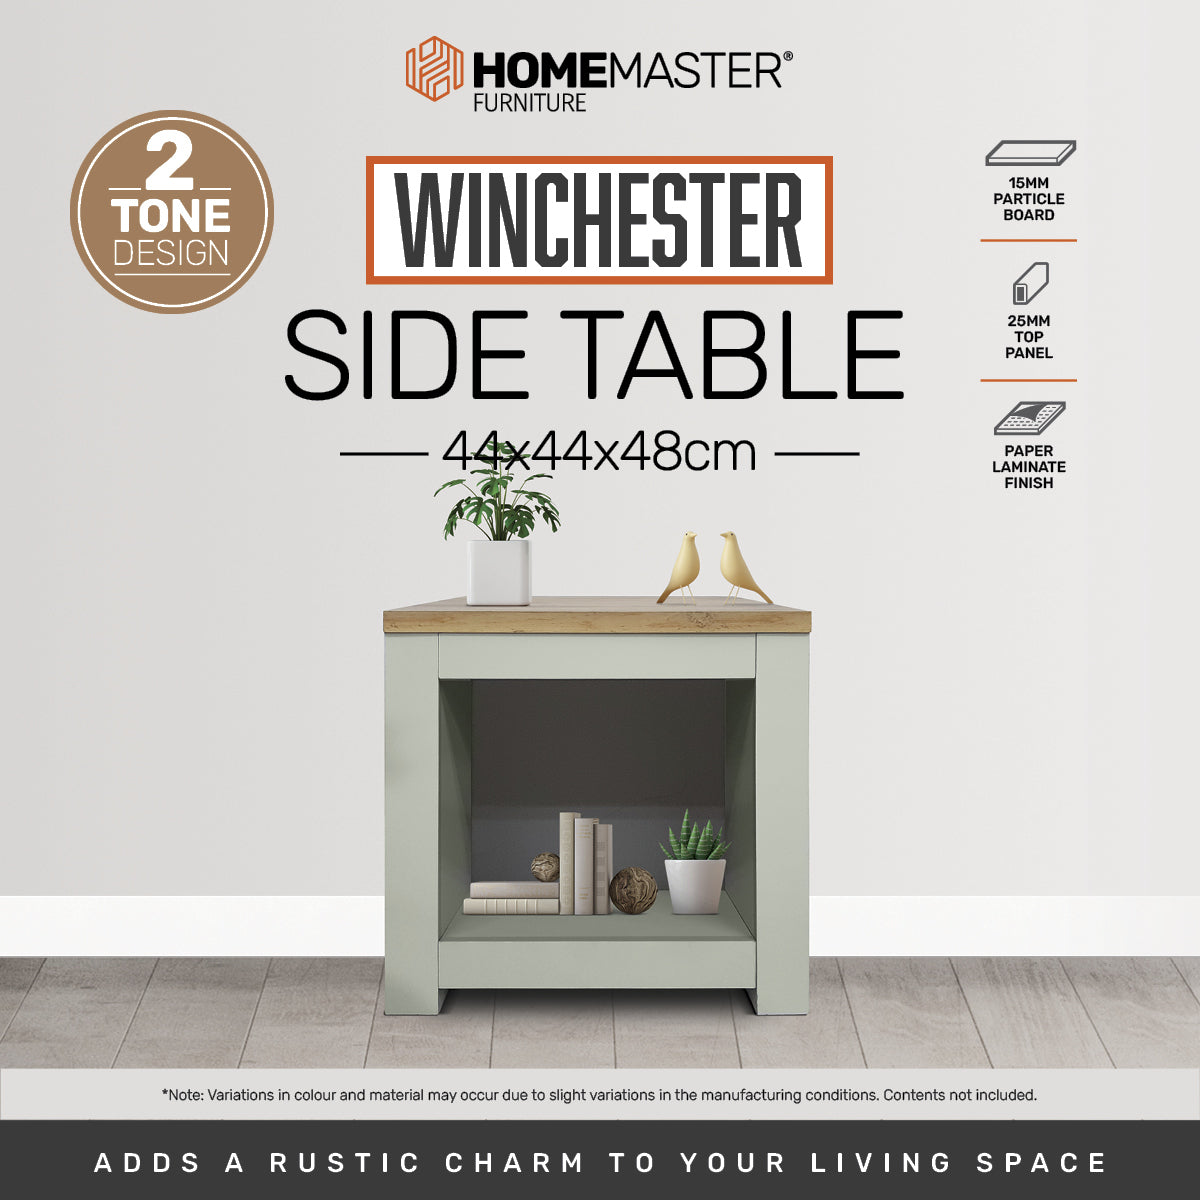 Home Master Winchester Two Tone Side Table Stylish Flawless Design 44 x 48cm Deals499